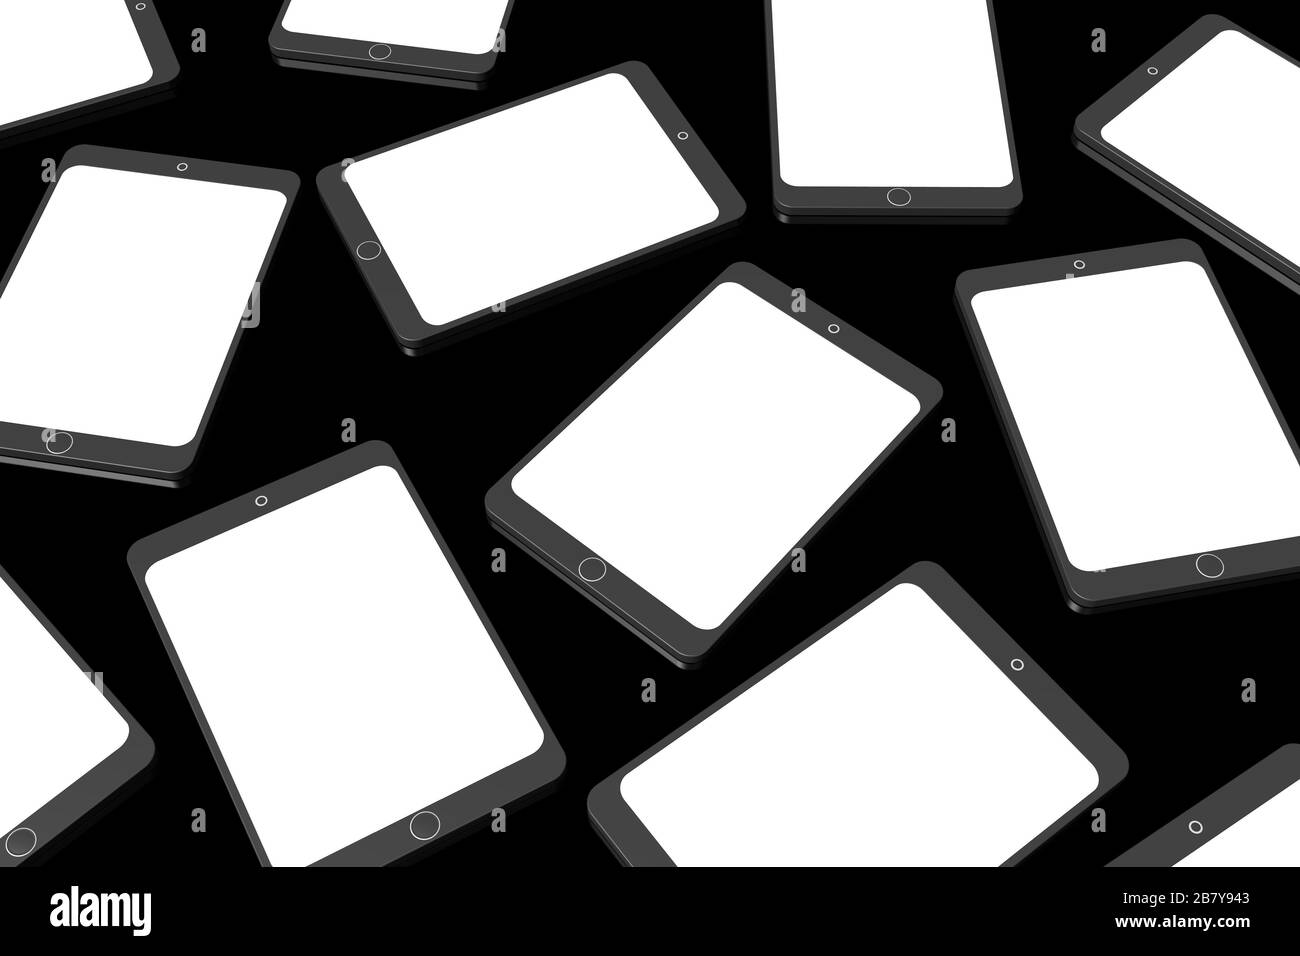 3D tablets - isolated on black background Stock Photo